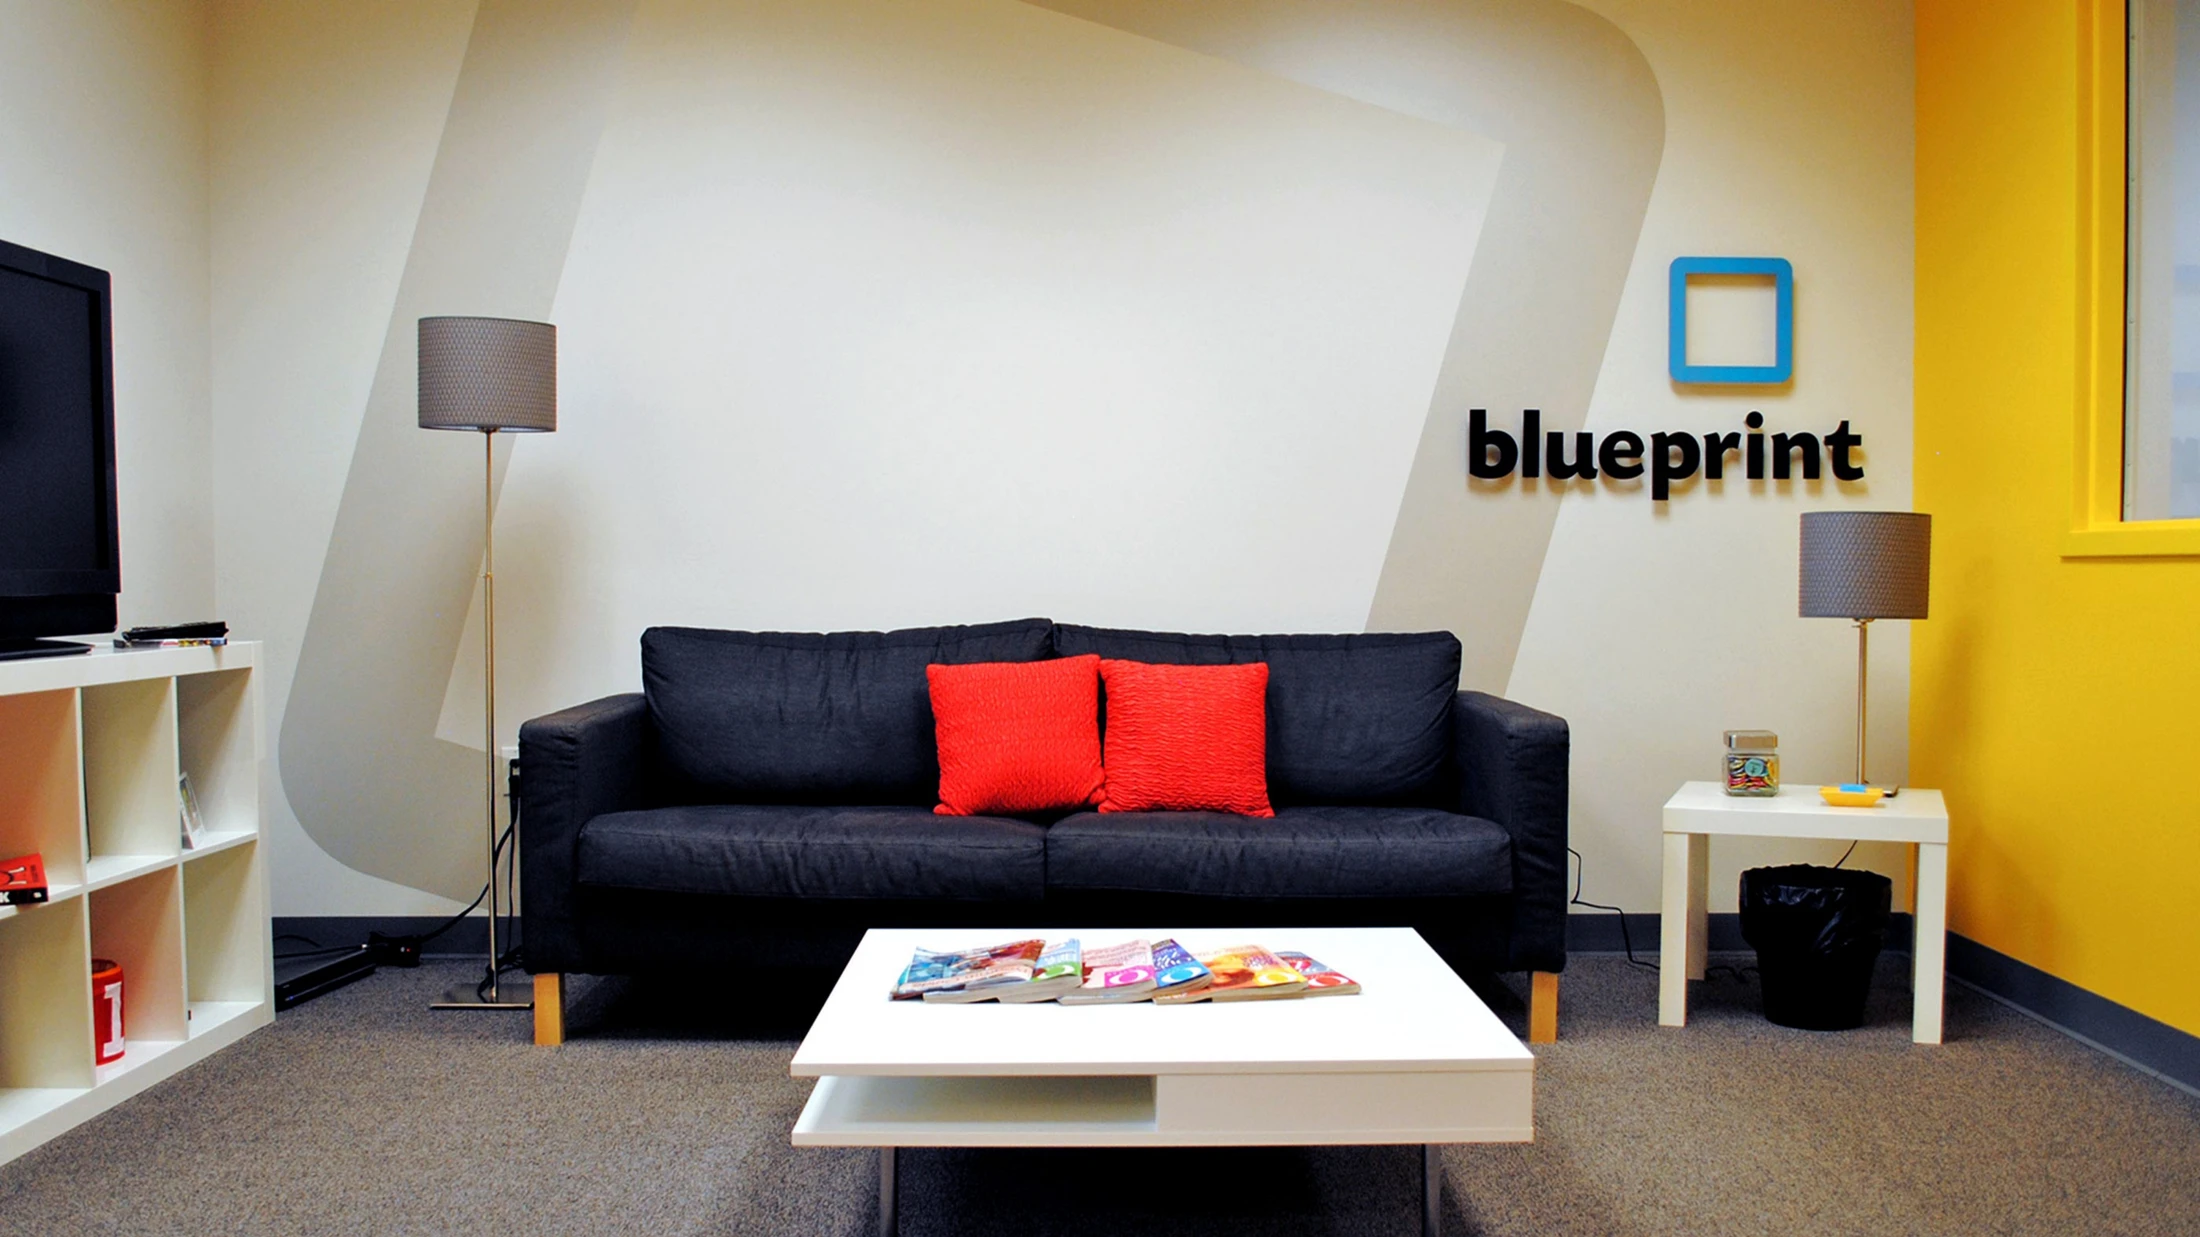 A living room with a blueprint logo on the wall.